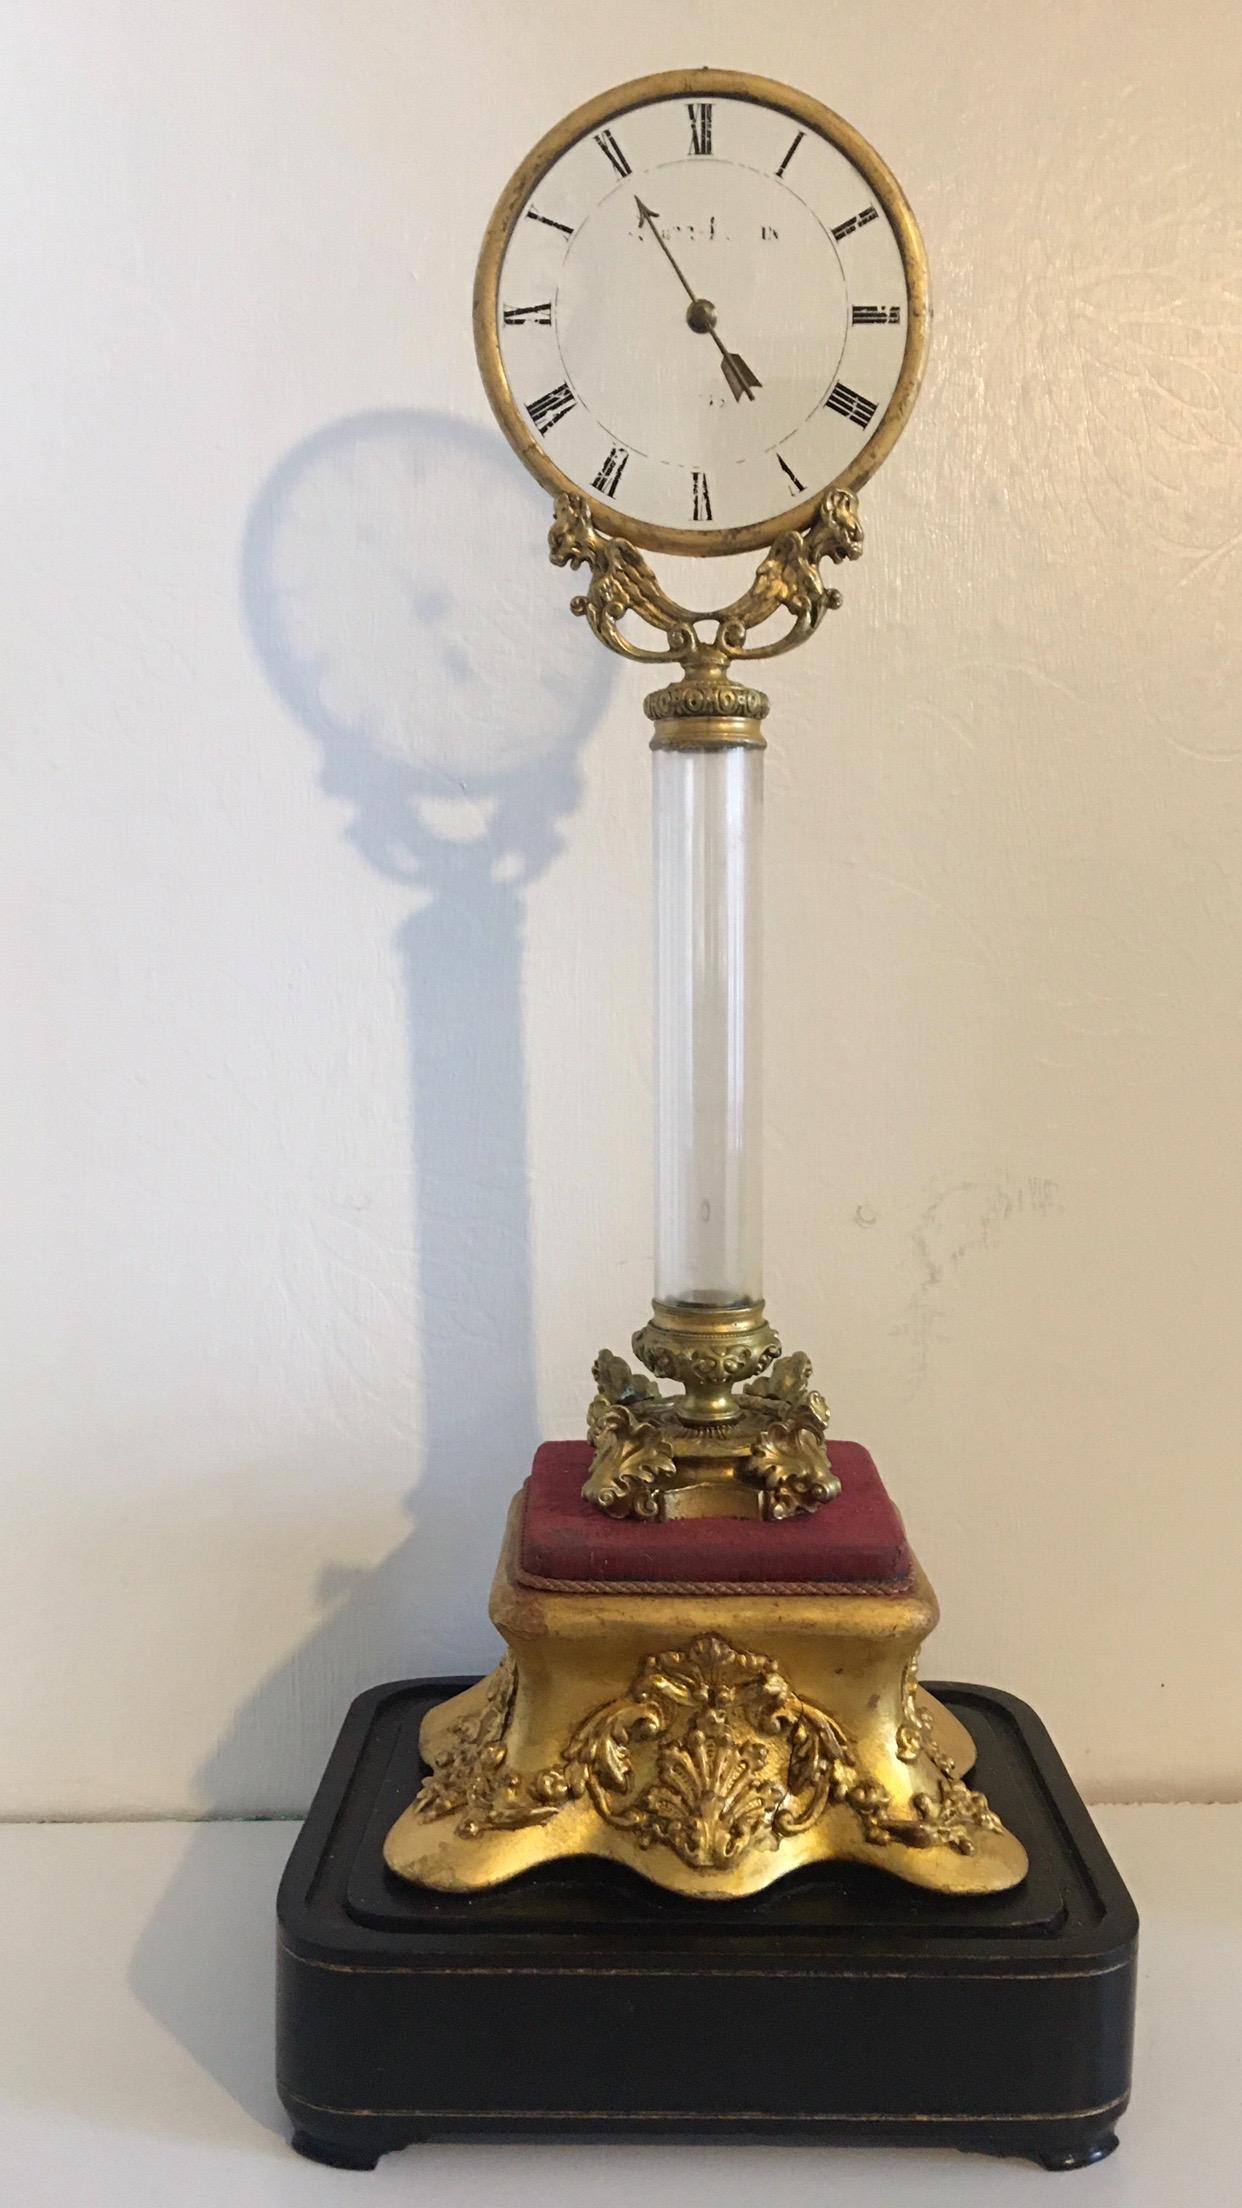 (Robert Houdin 1805-1870)
A very rare tall Houdin mystery clock from around the mid-19th century (circa 1850). A 4.75 inch glass dial raised on bronze with ormulu mounds on a giltwood base along with a signed movement.

The image also provides